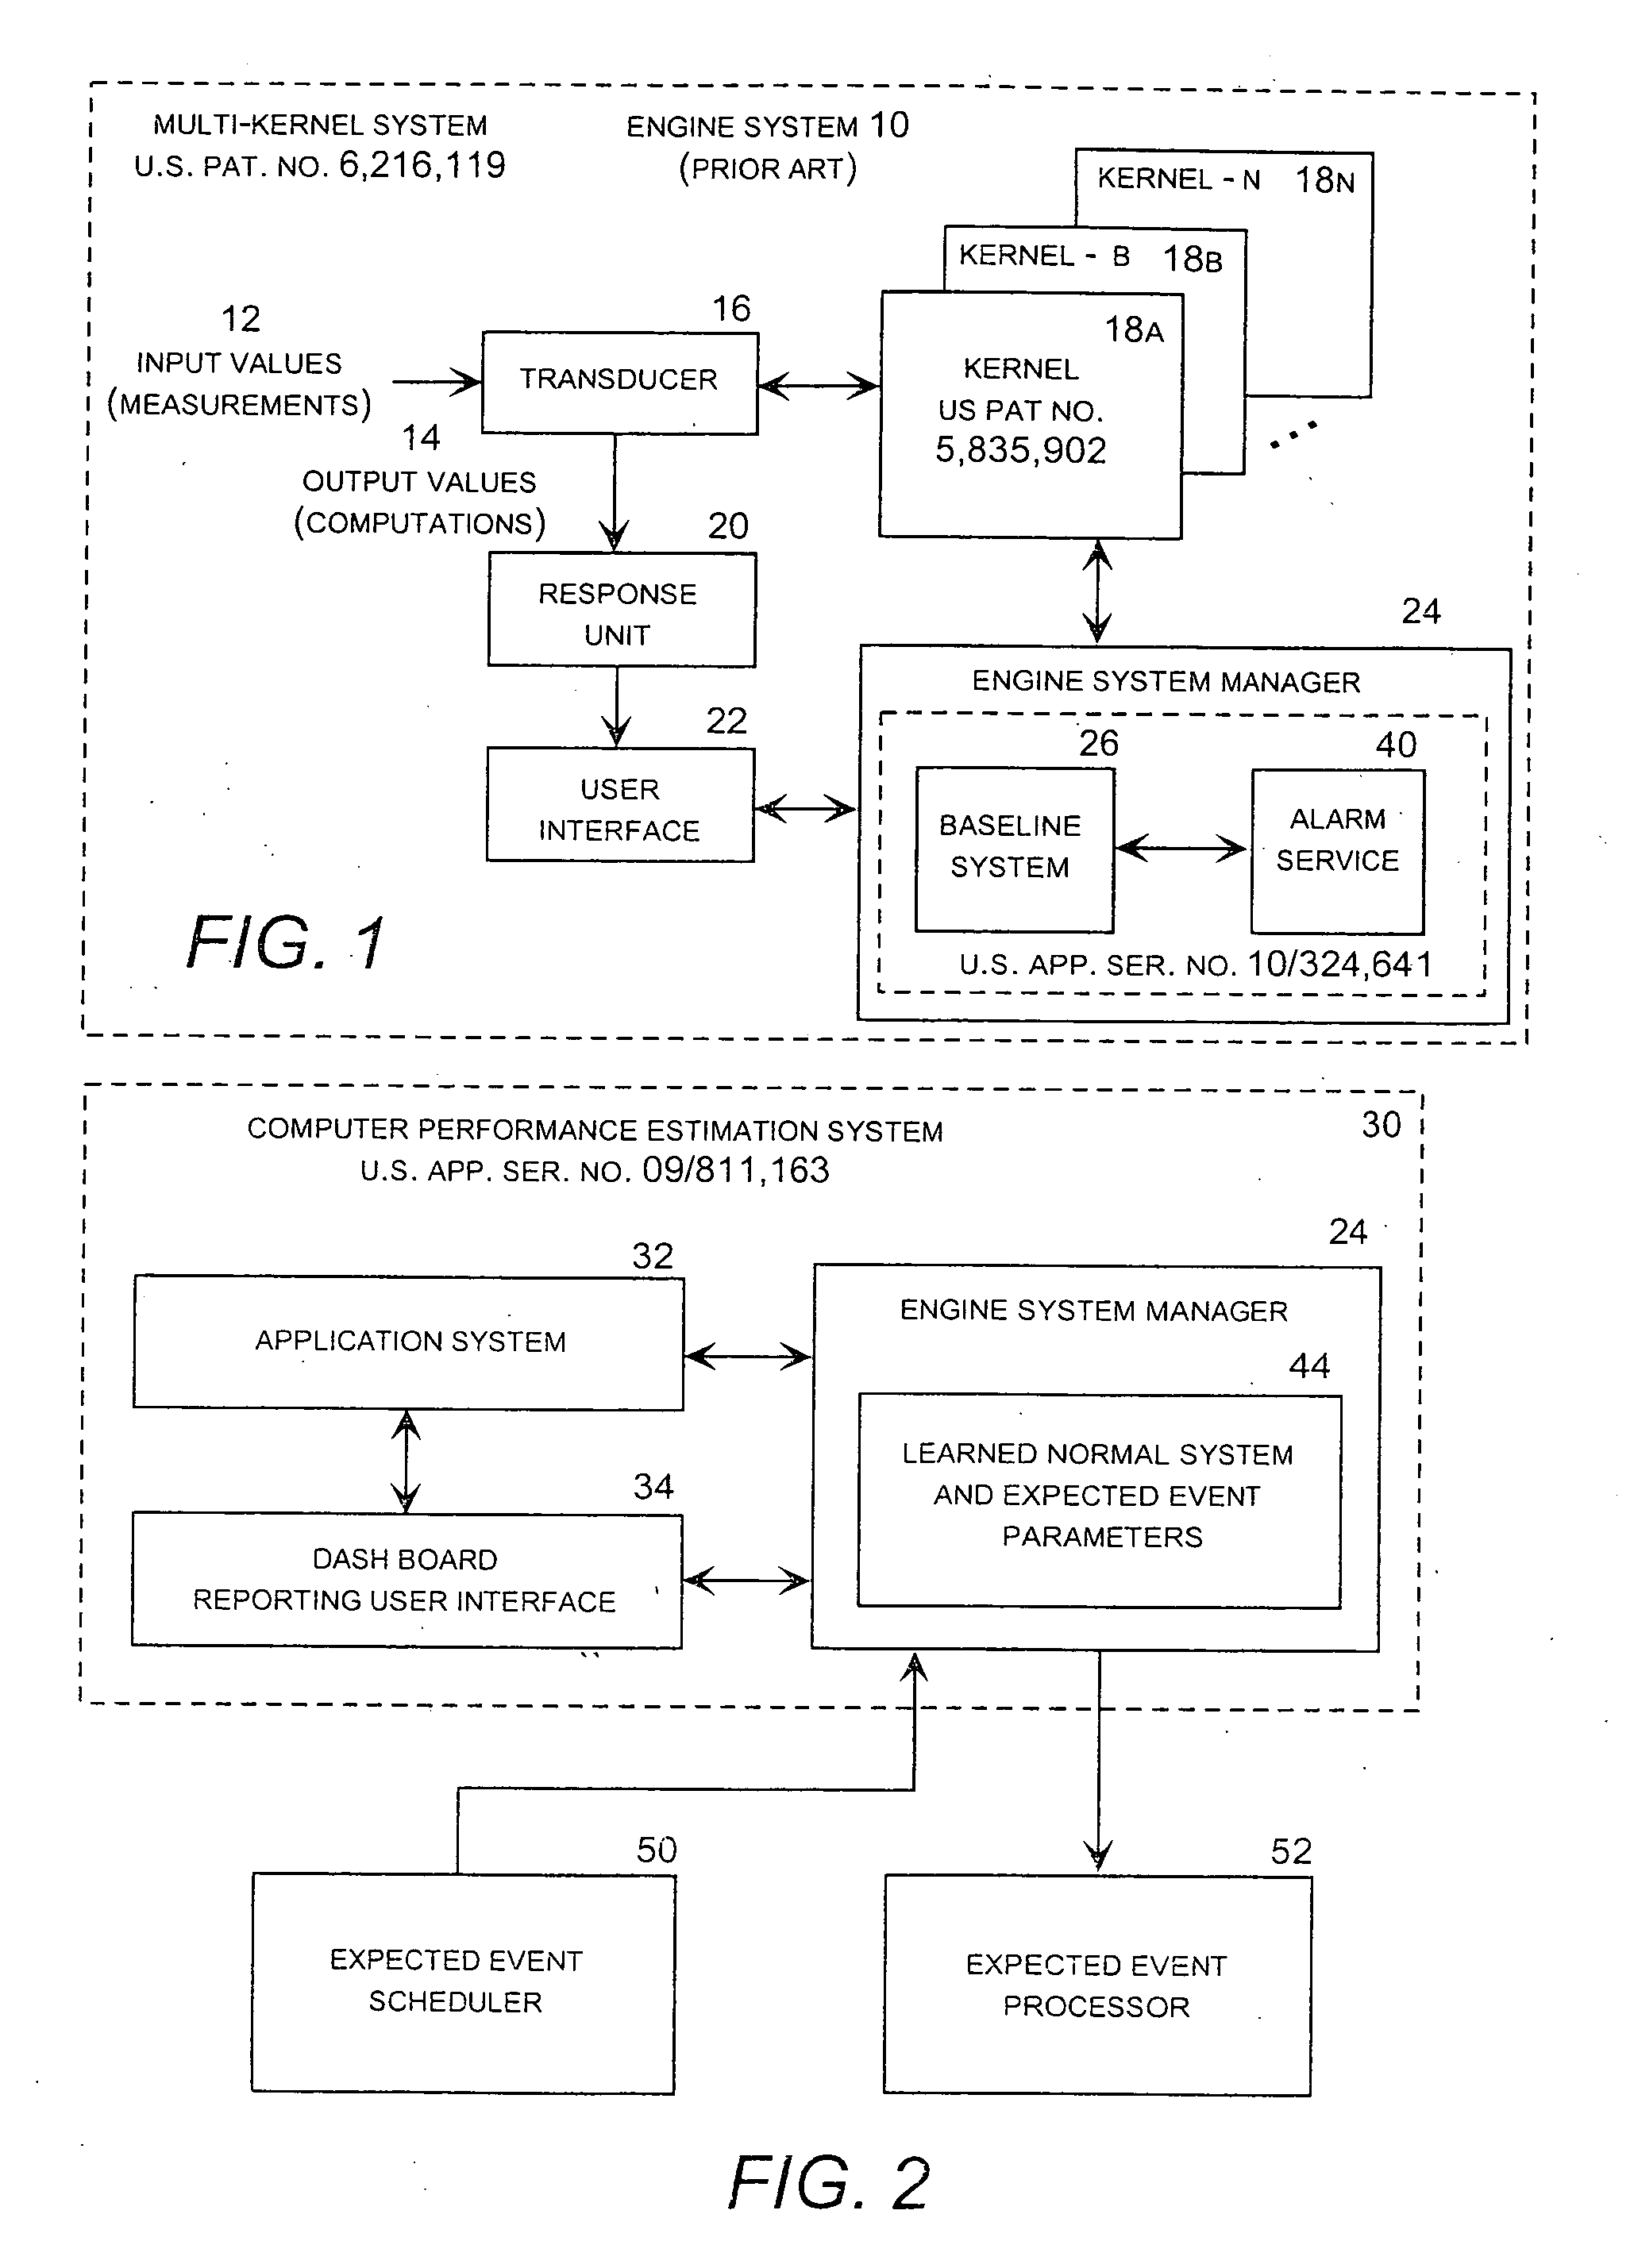 Computer performance estimation system configured to take expected events into consideration